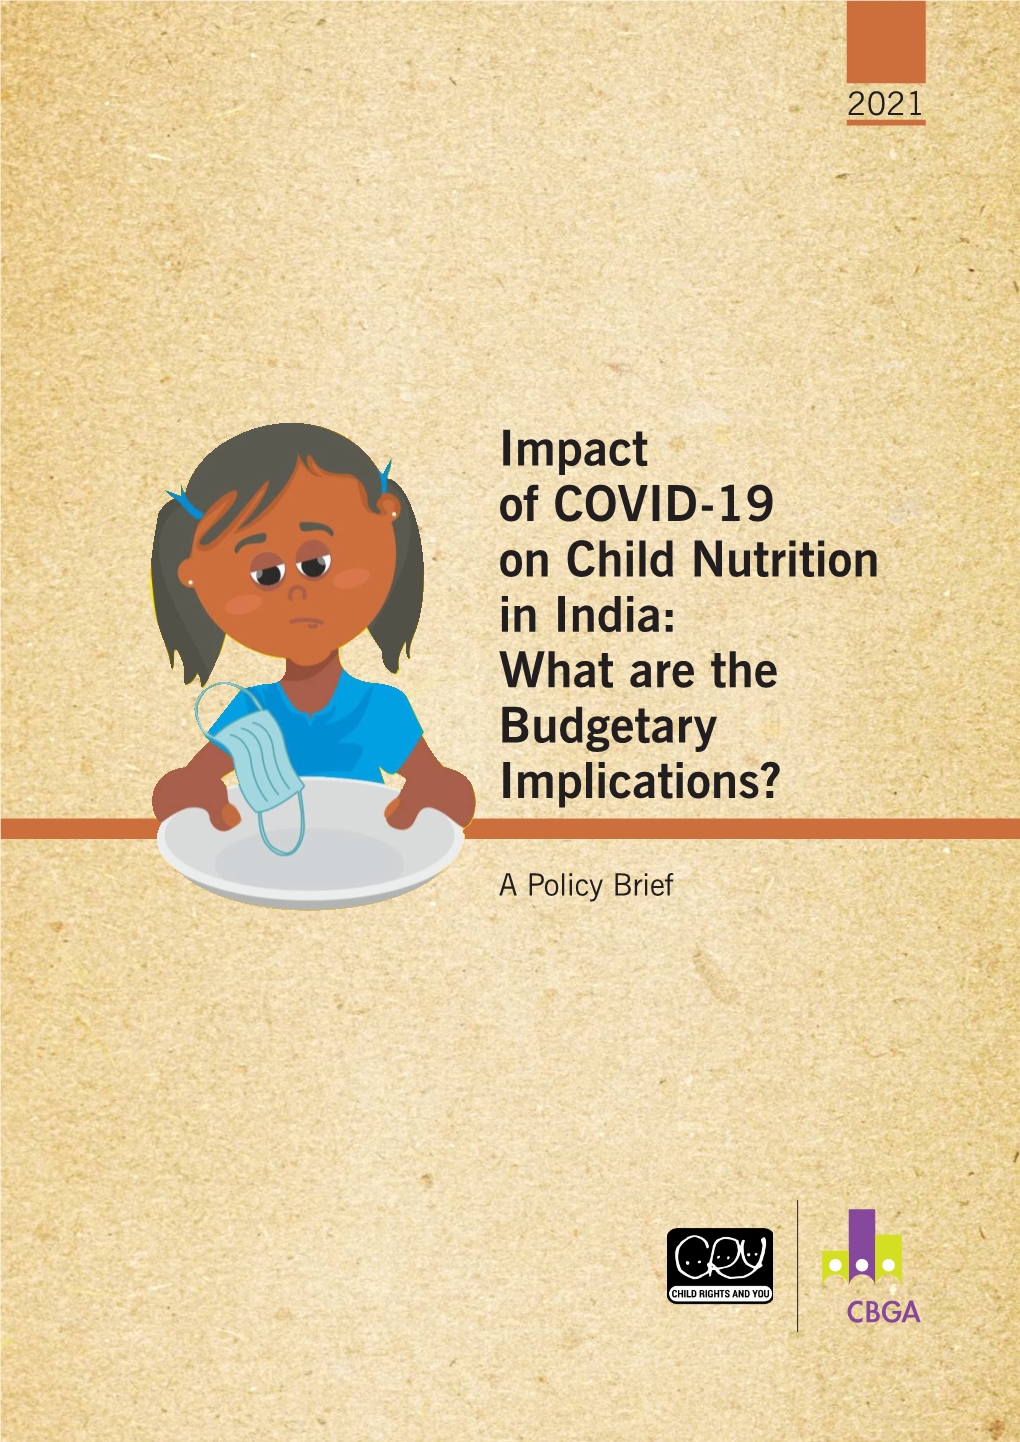 Impact of COVID-19 on Child Nutrition in India: What Are the Budgetary Implications?